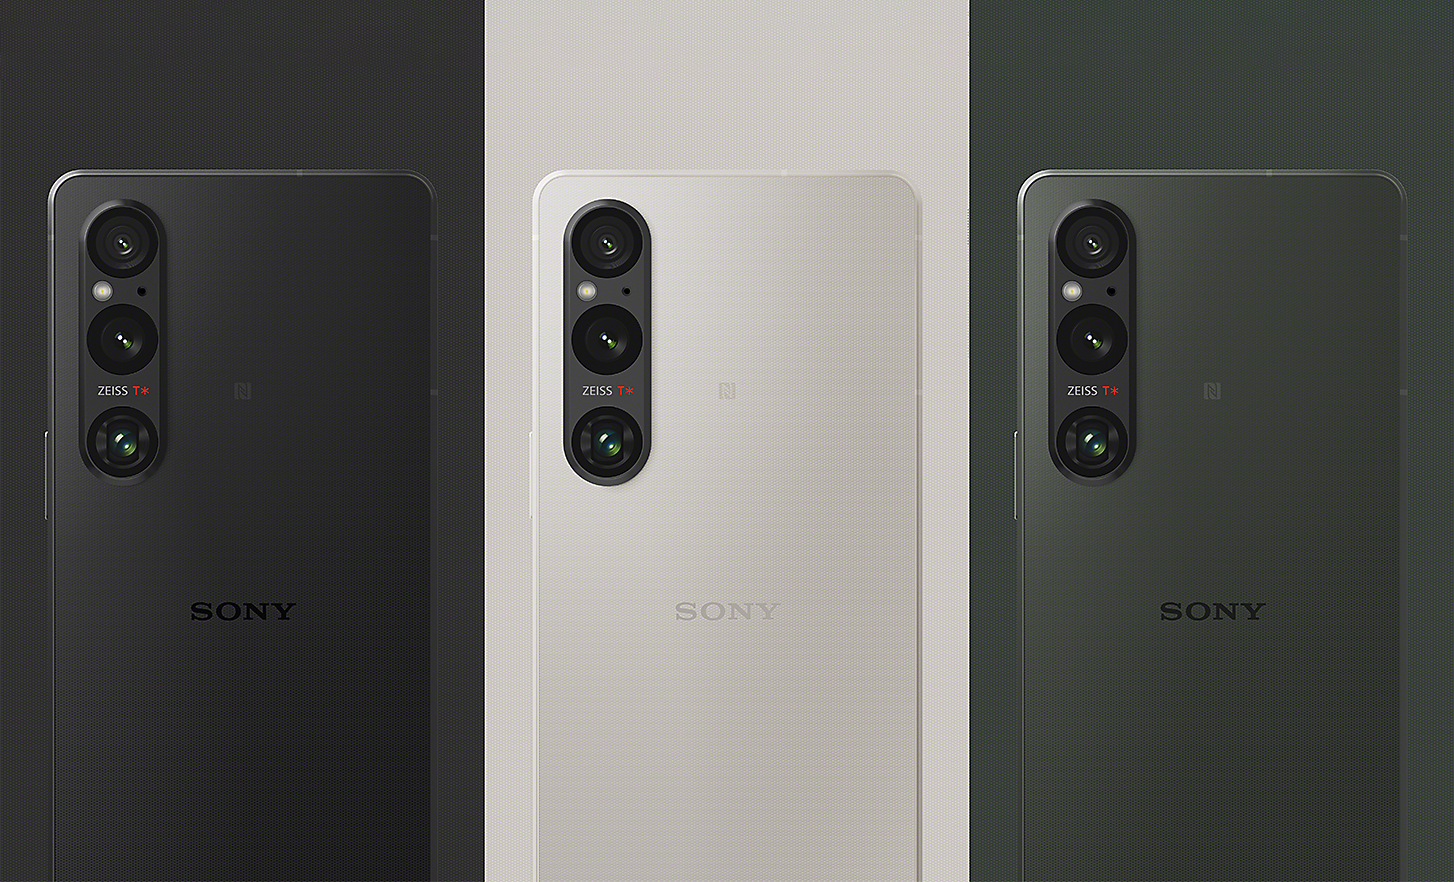 Line-up of three rear-facing Xperia 1 V smartphones in Black, Platinum Silver and Khaki Green